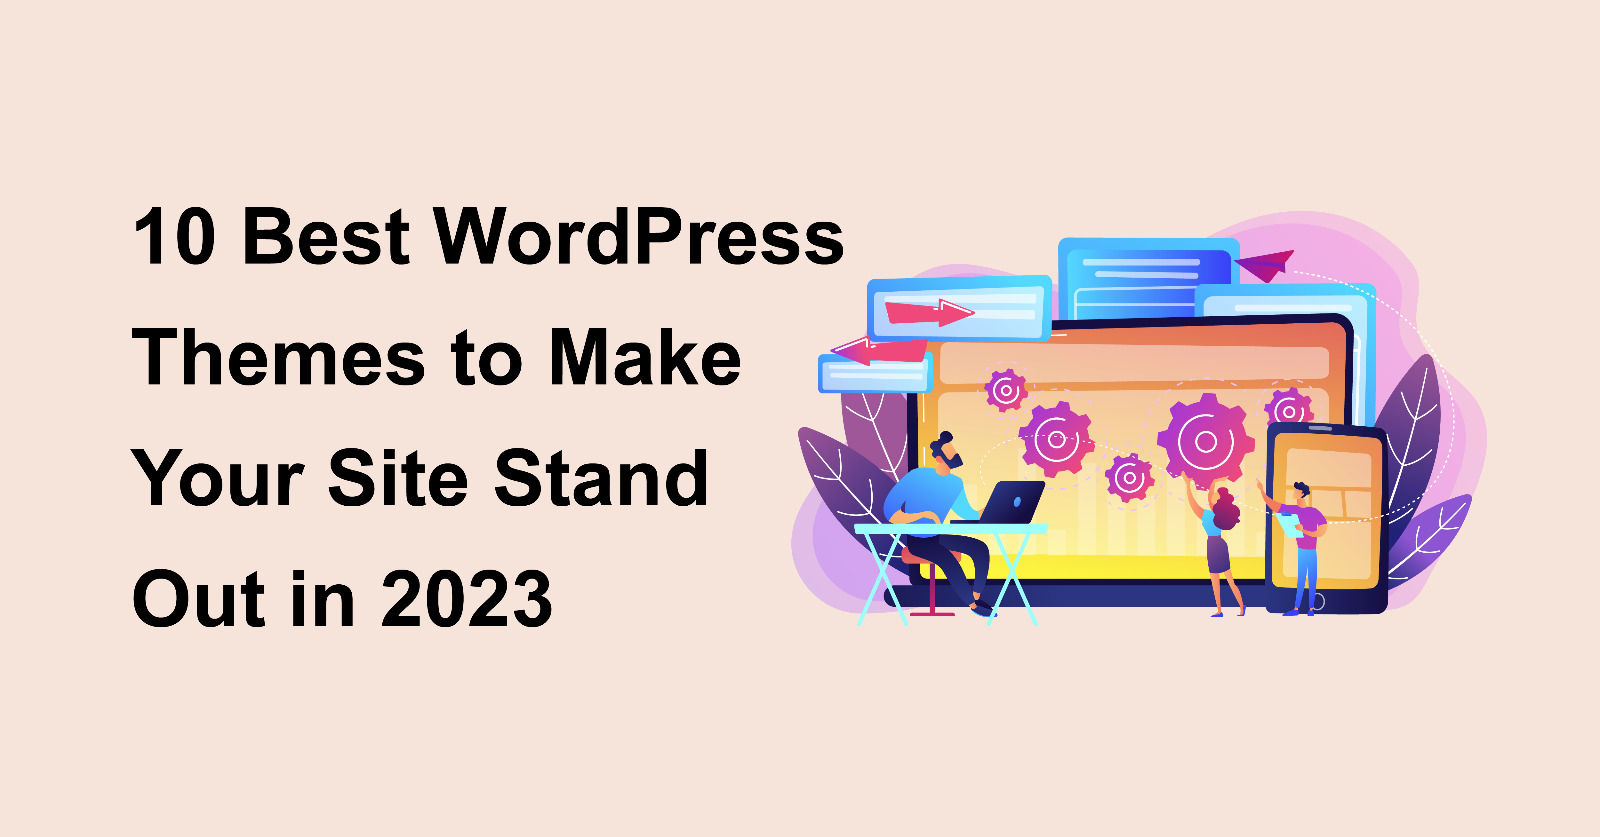 10 Best WordPress Themes to Make Your Site Stand Out in 2023